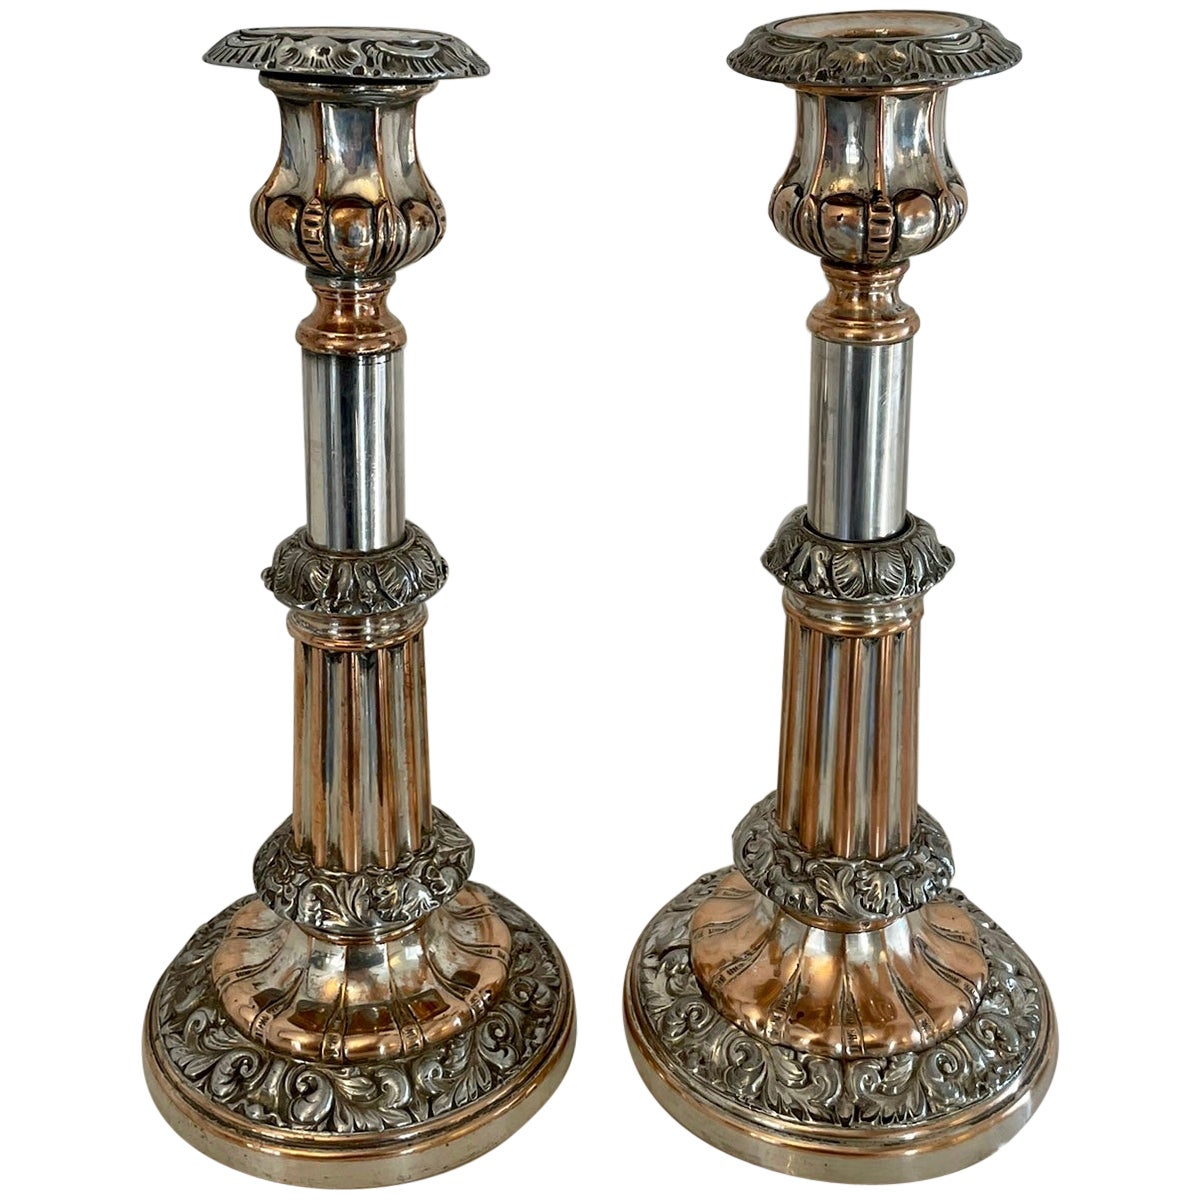 Unusual Pair Of Antique Quality Sheffield Plated Telescopic Candlesticks For Sale